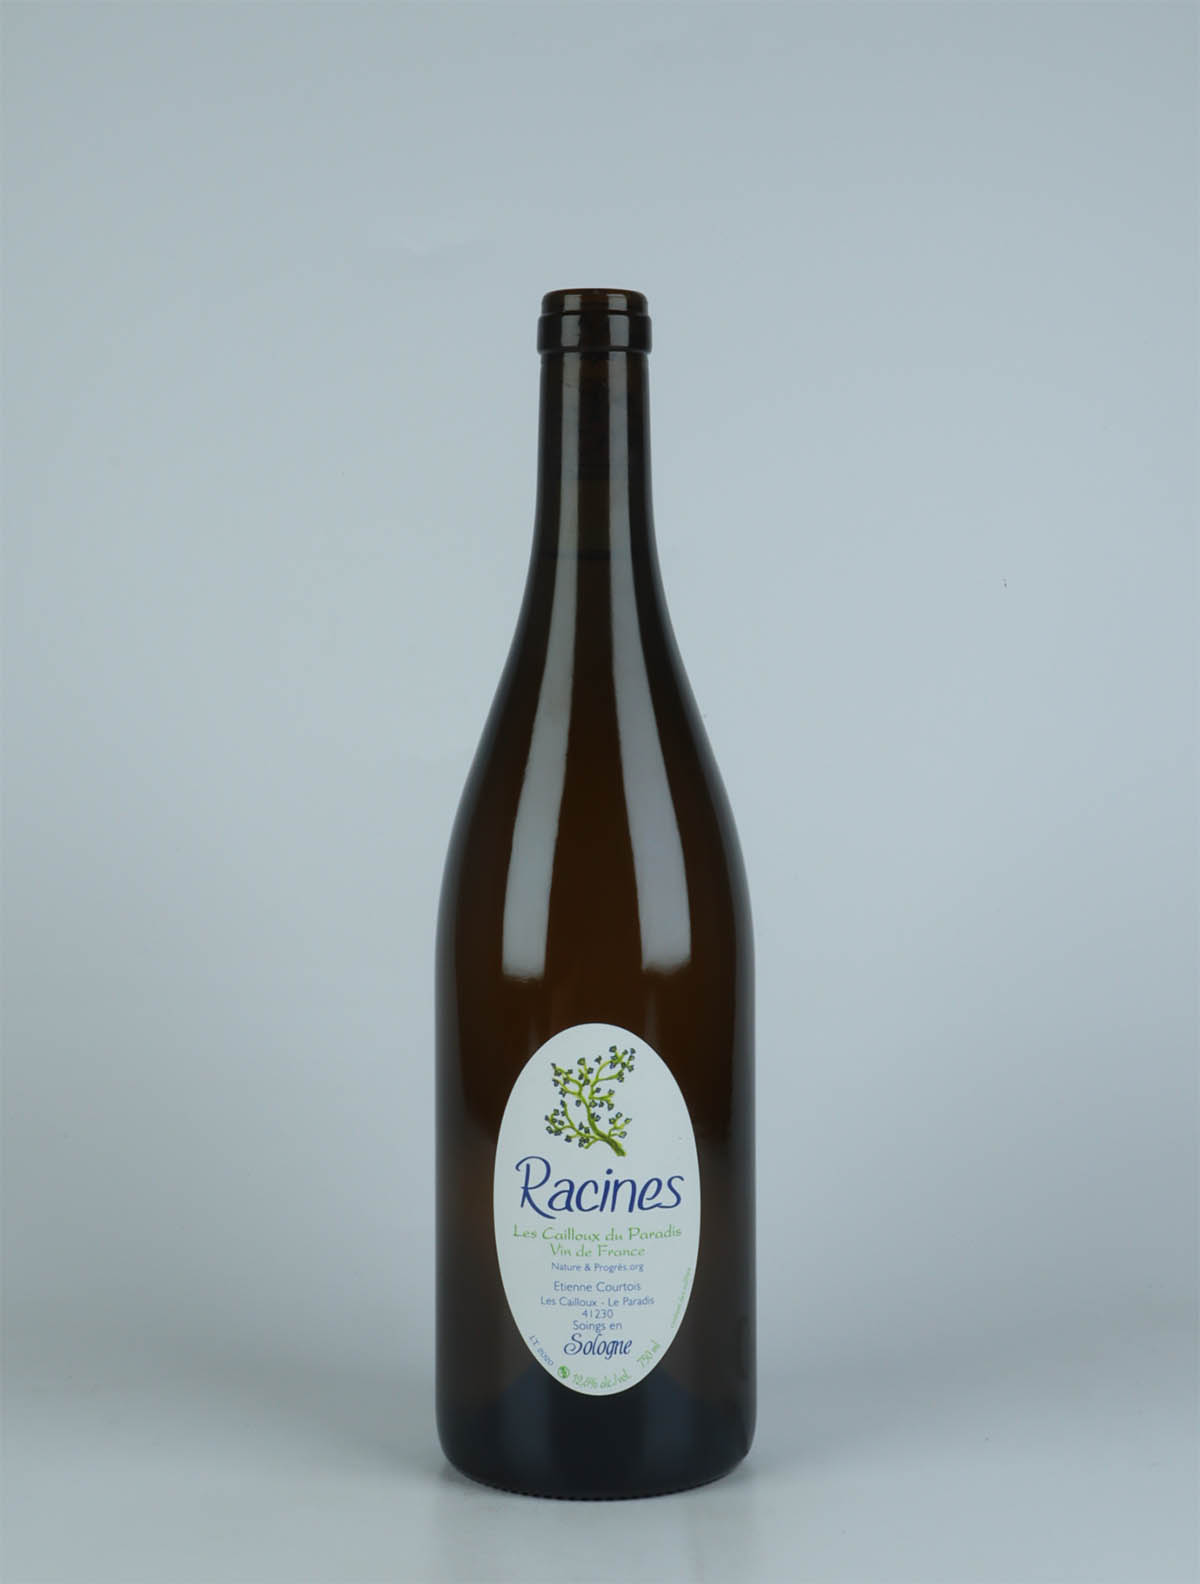 A bottle 2020 Racines Blanc White wine from Etienne Courtois, Loire in France